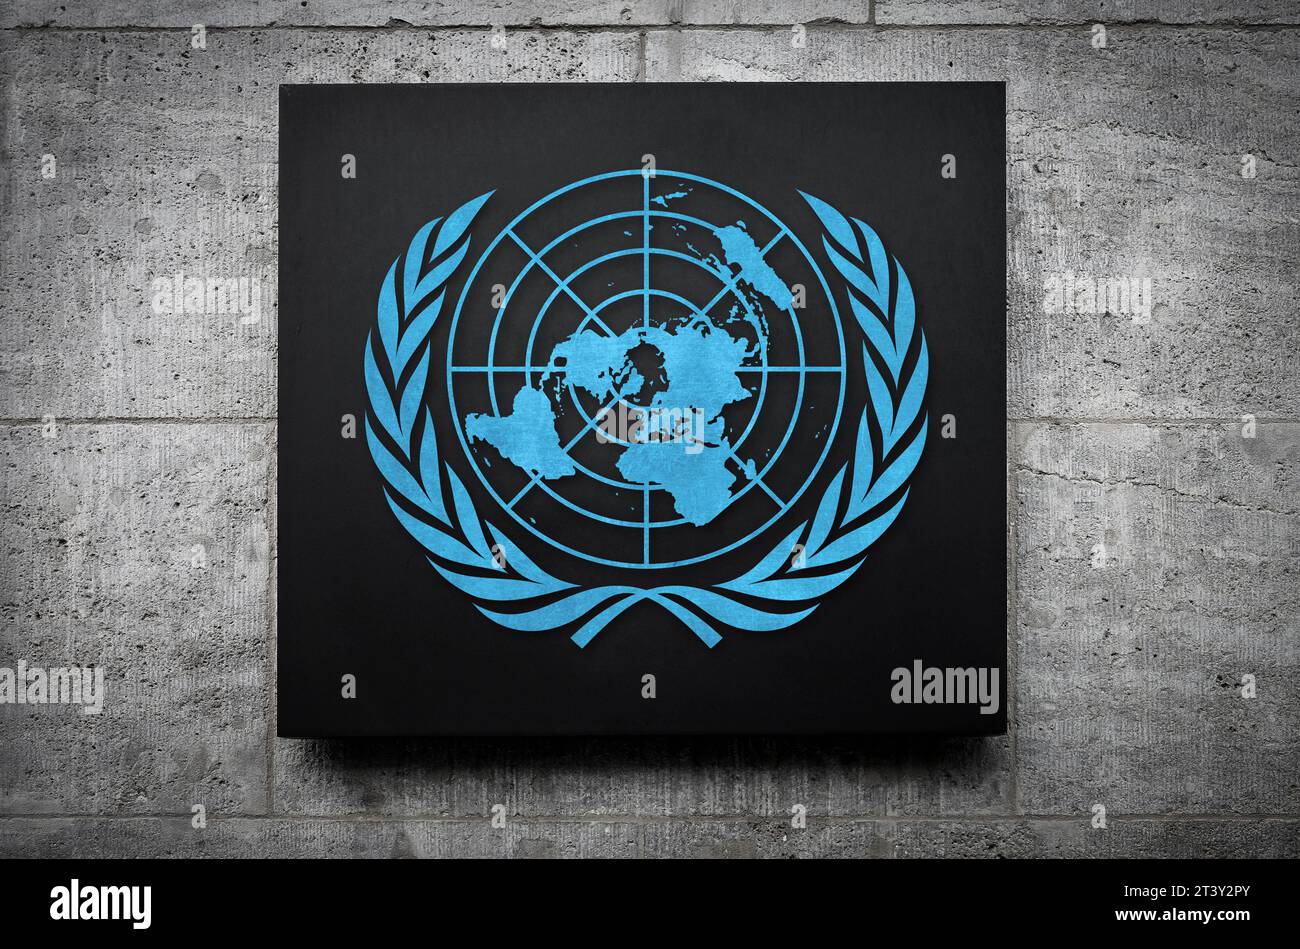 United Nations - intergovernmental organization for international peace and security Stock Photo